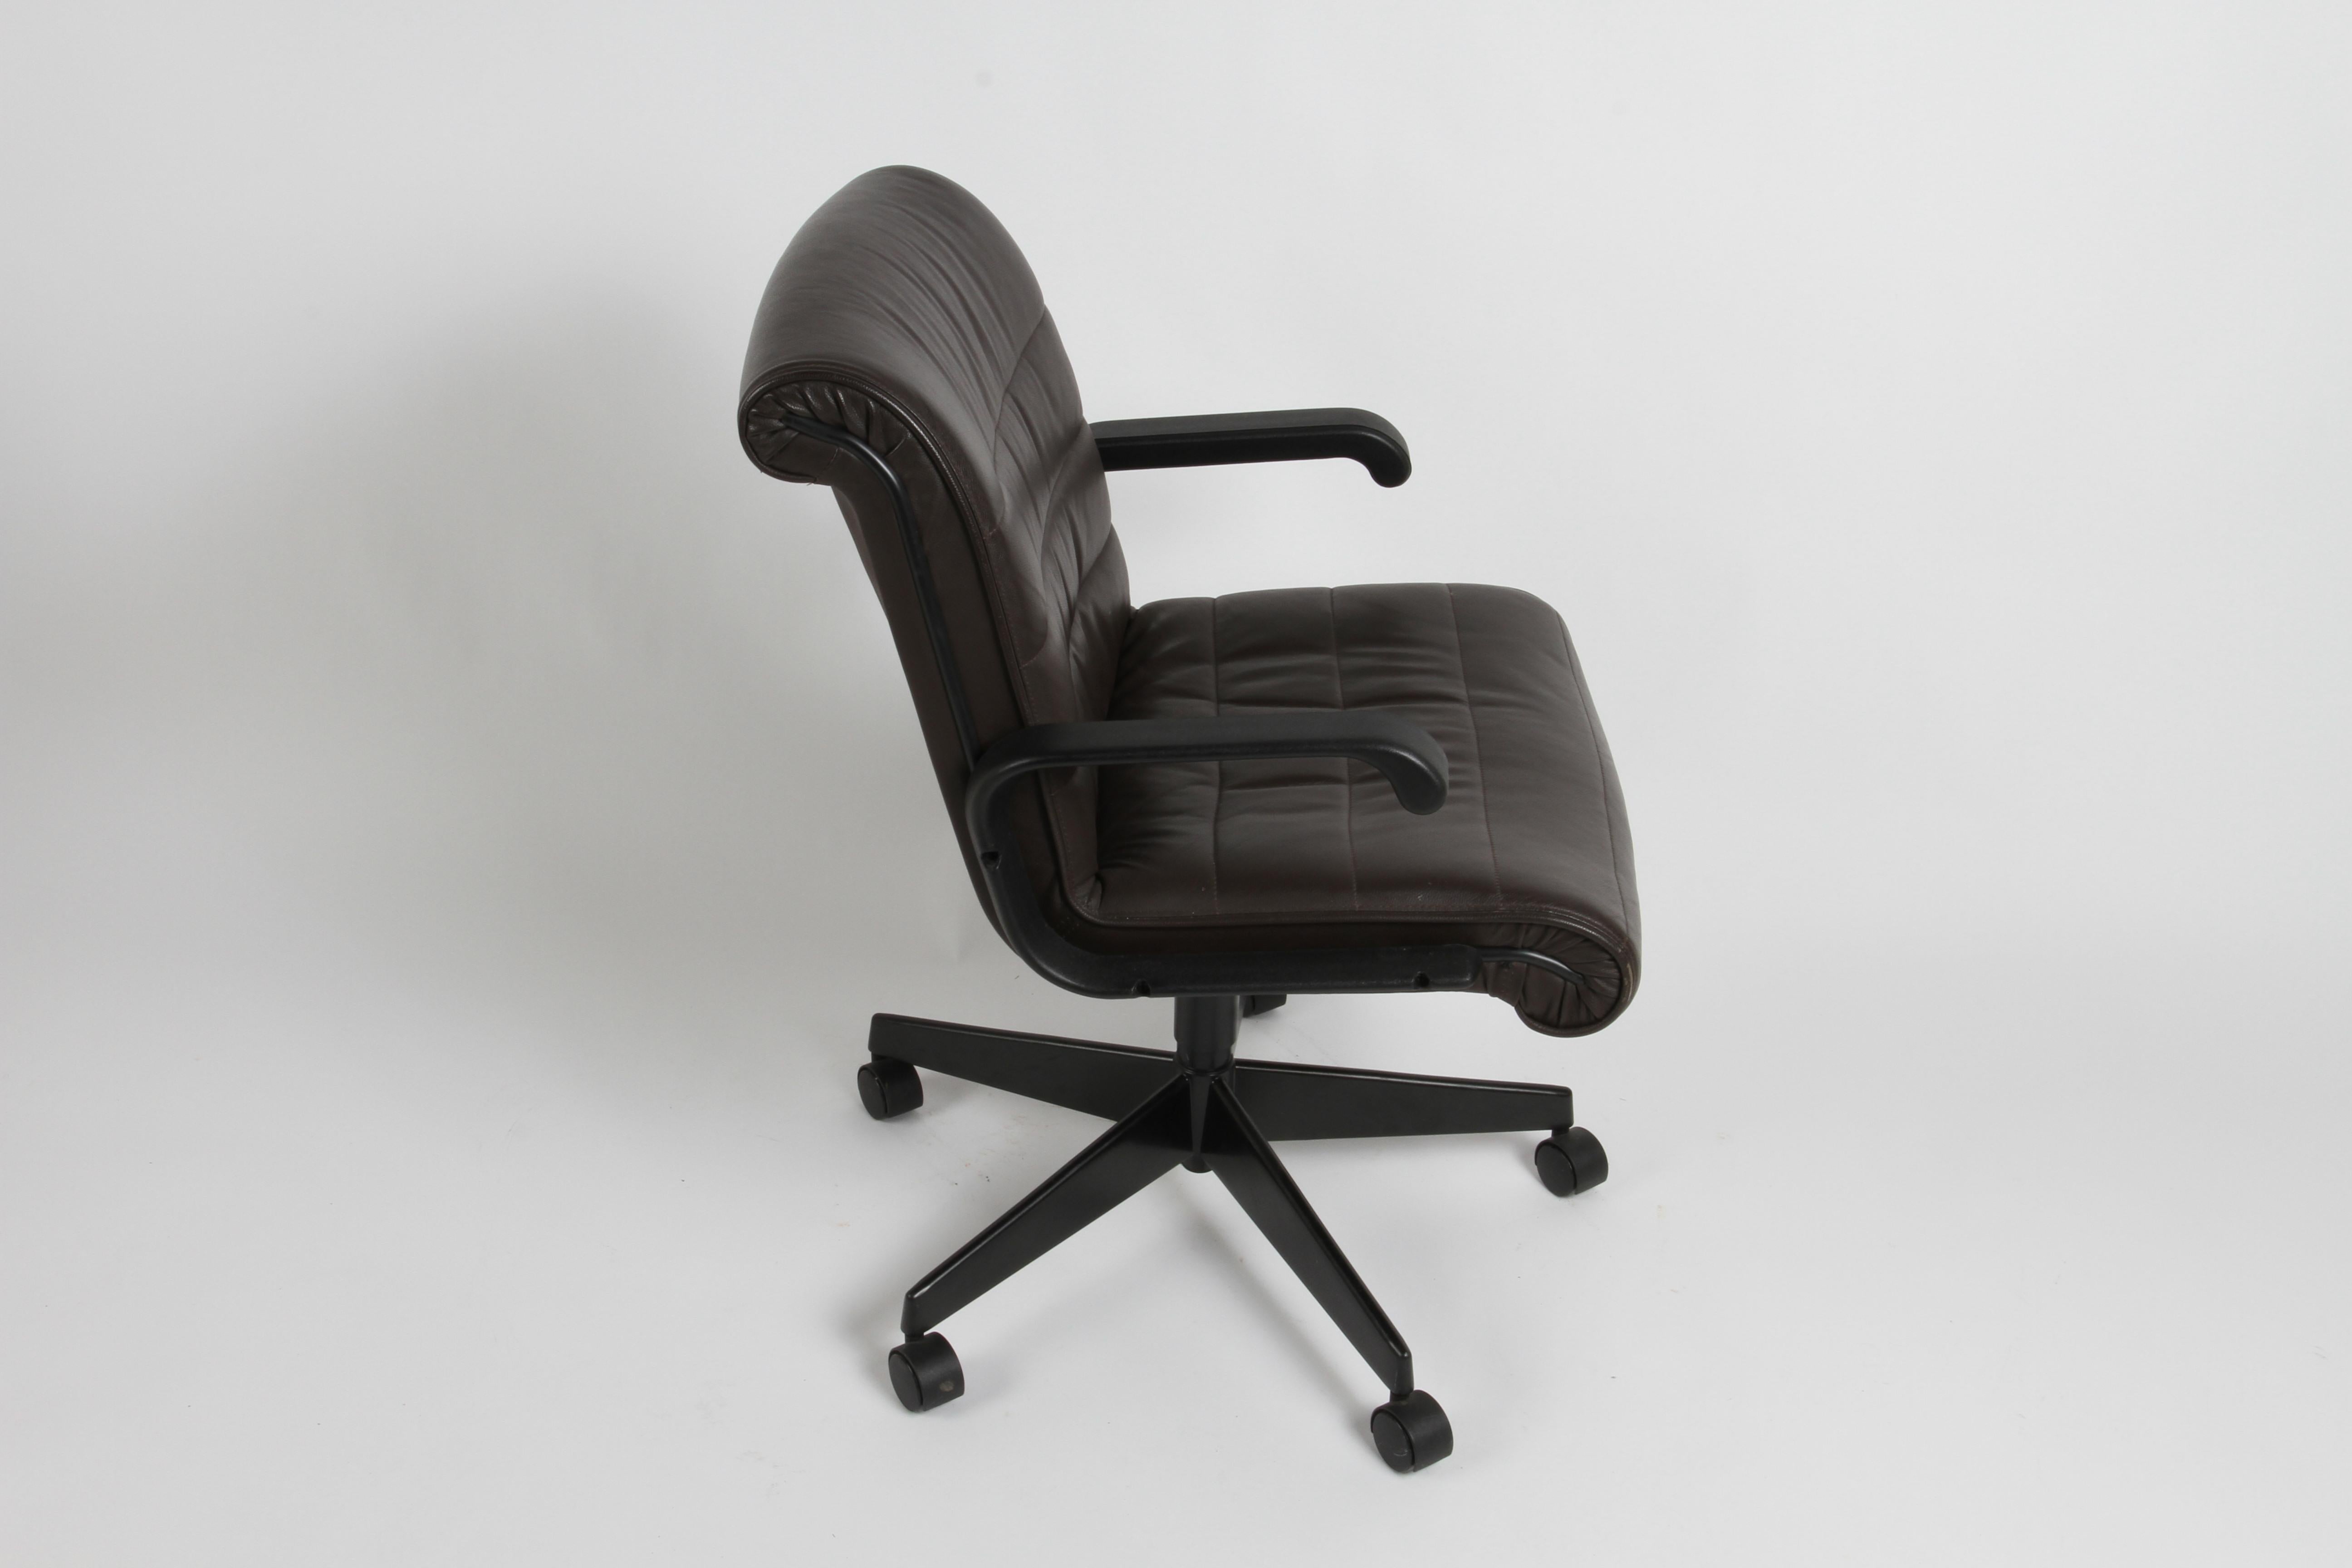 Richard Sapper for Knoll Desk Task Executive or Conference Chair - Brown Leather In Good Condition For Sale In St. Louis, MO